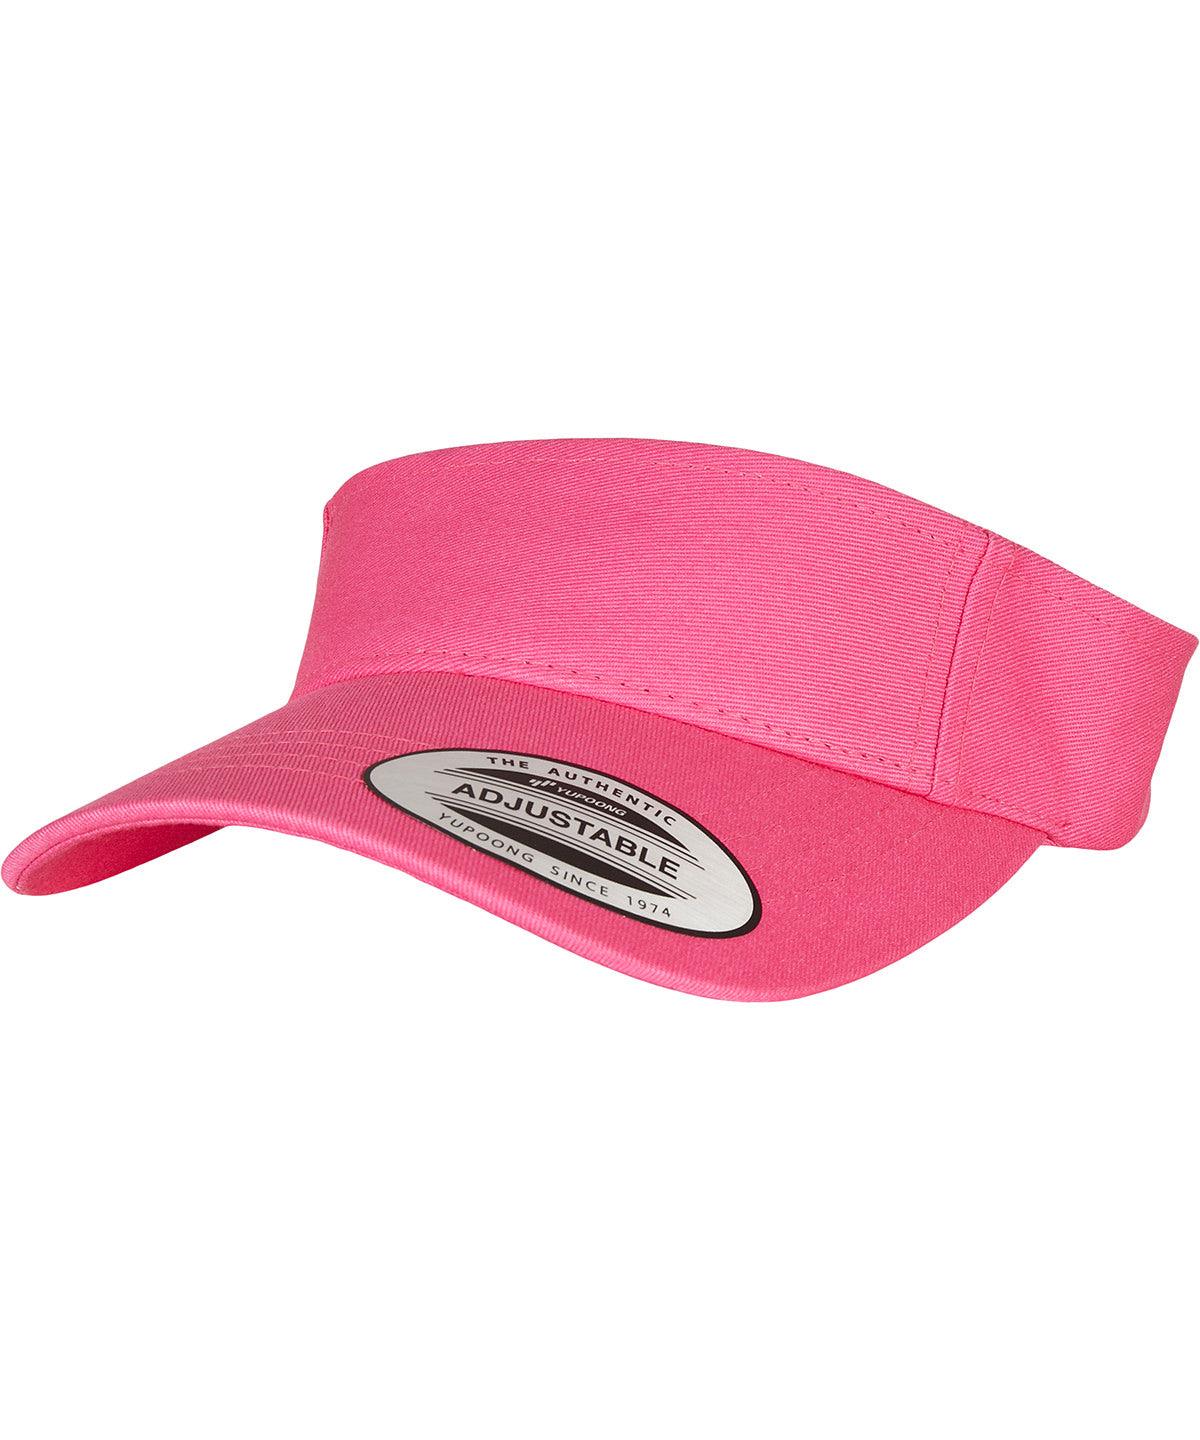 Cosmo Pink - | Centres Schoolwear Curved visor (8888) cap